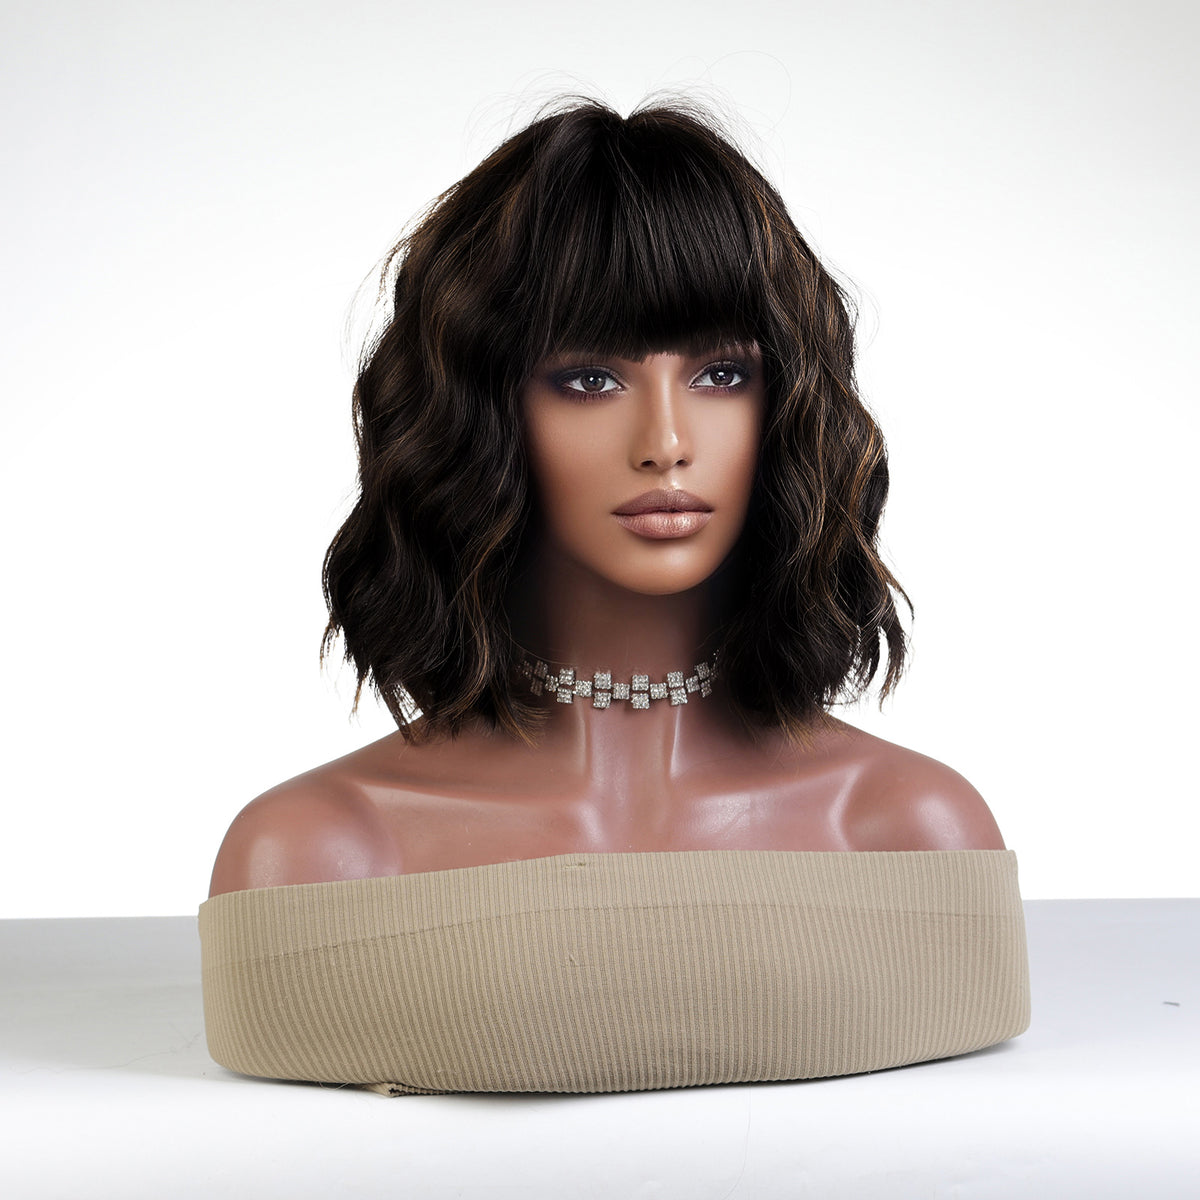 Haircube 14 Inch Short Black Curly Wavy Wig with Bang Heat Resistant Synthetic Wig for Women Natural Comfortable Fashion Party Diy Daily  lc8087